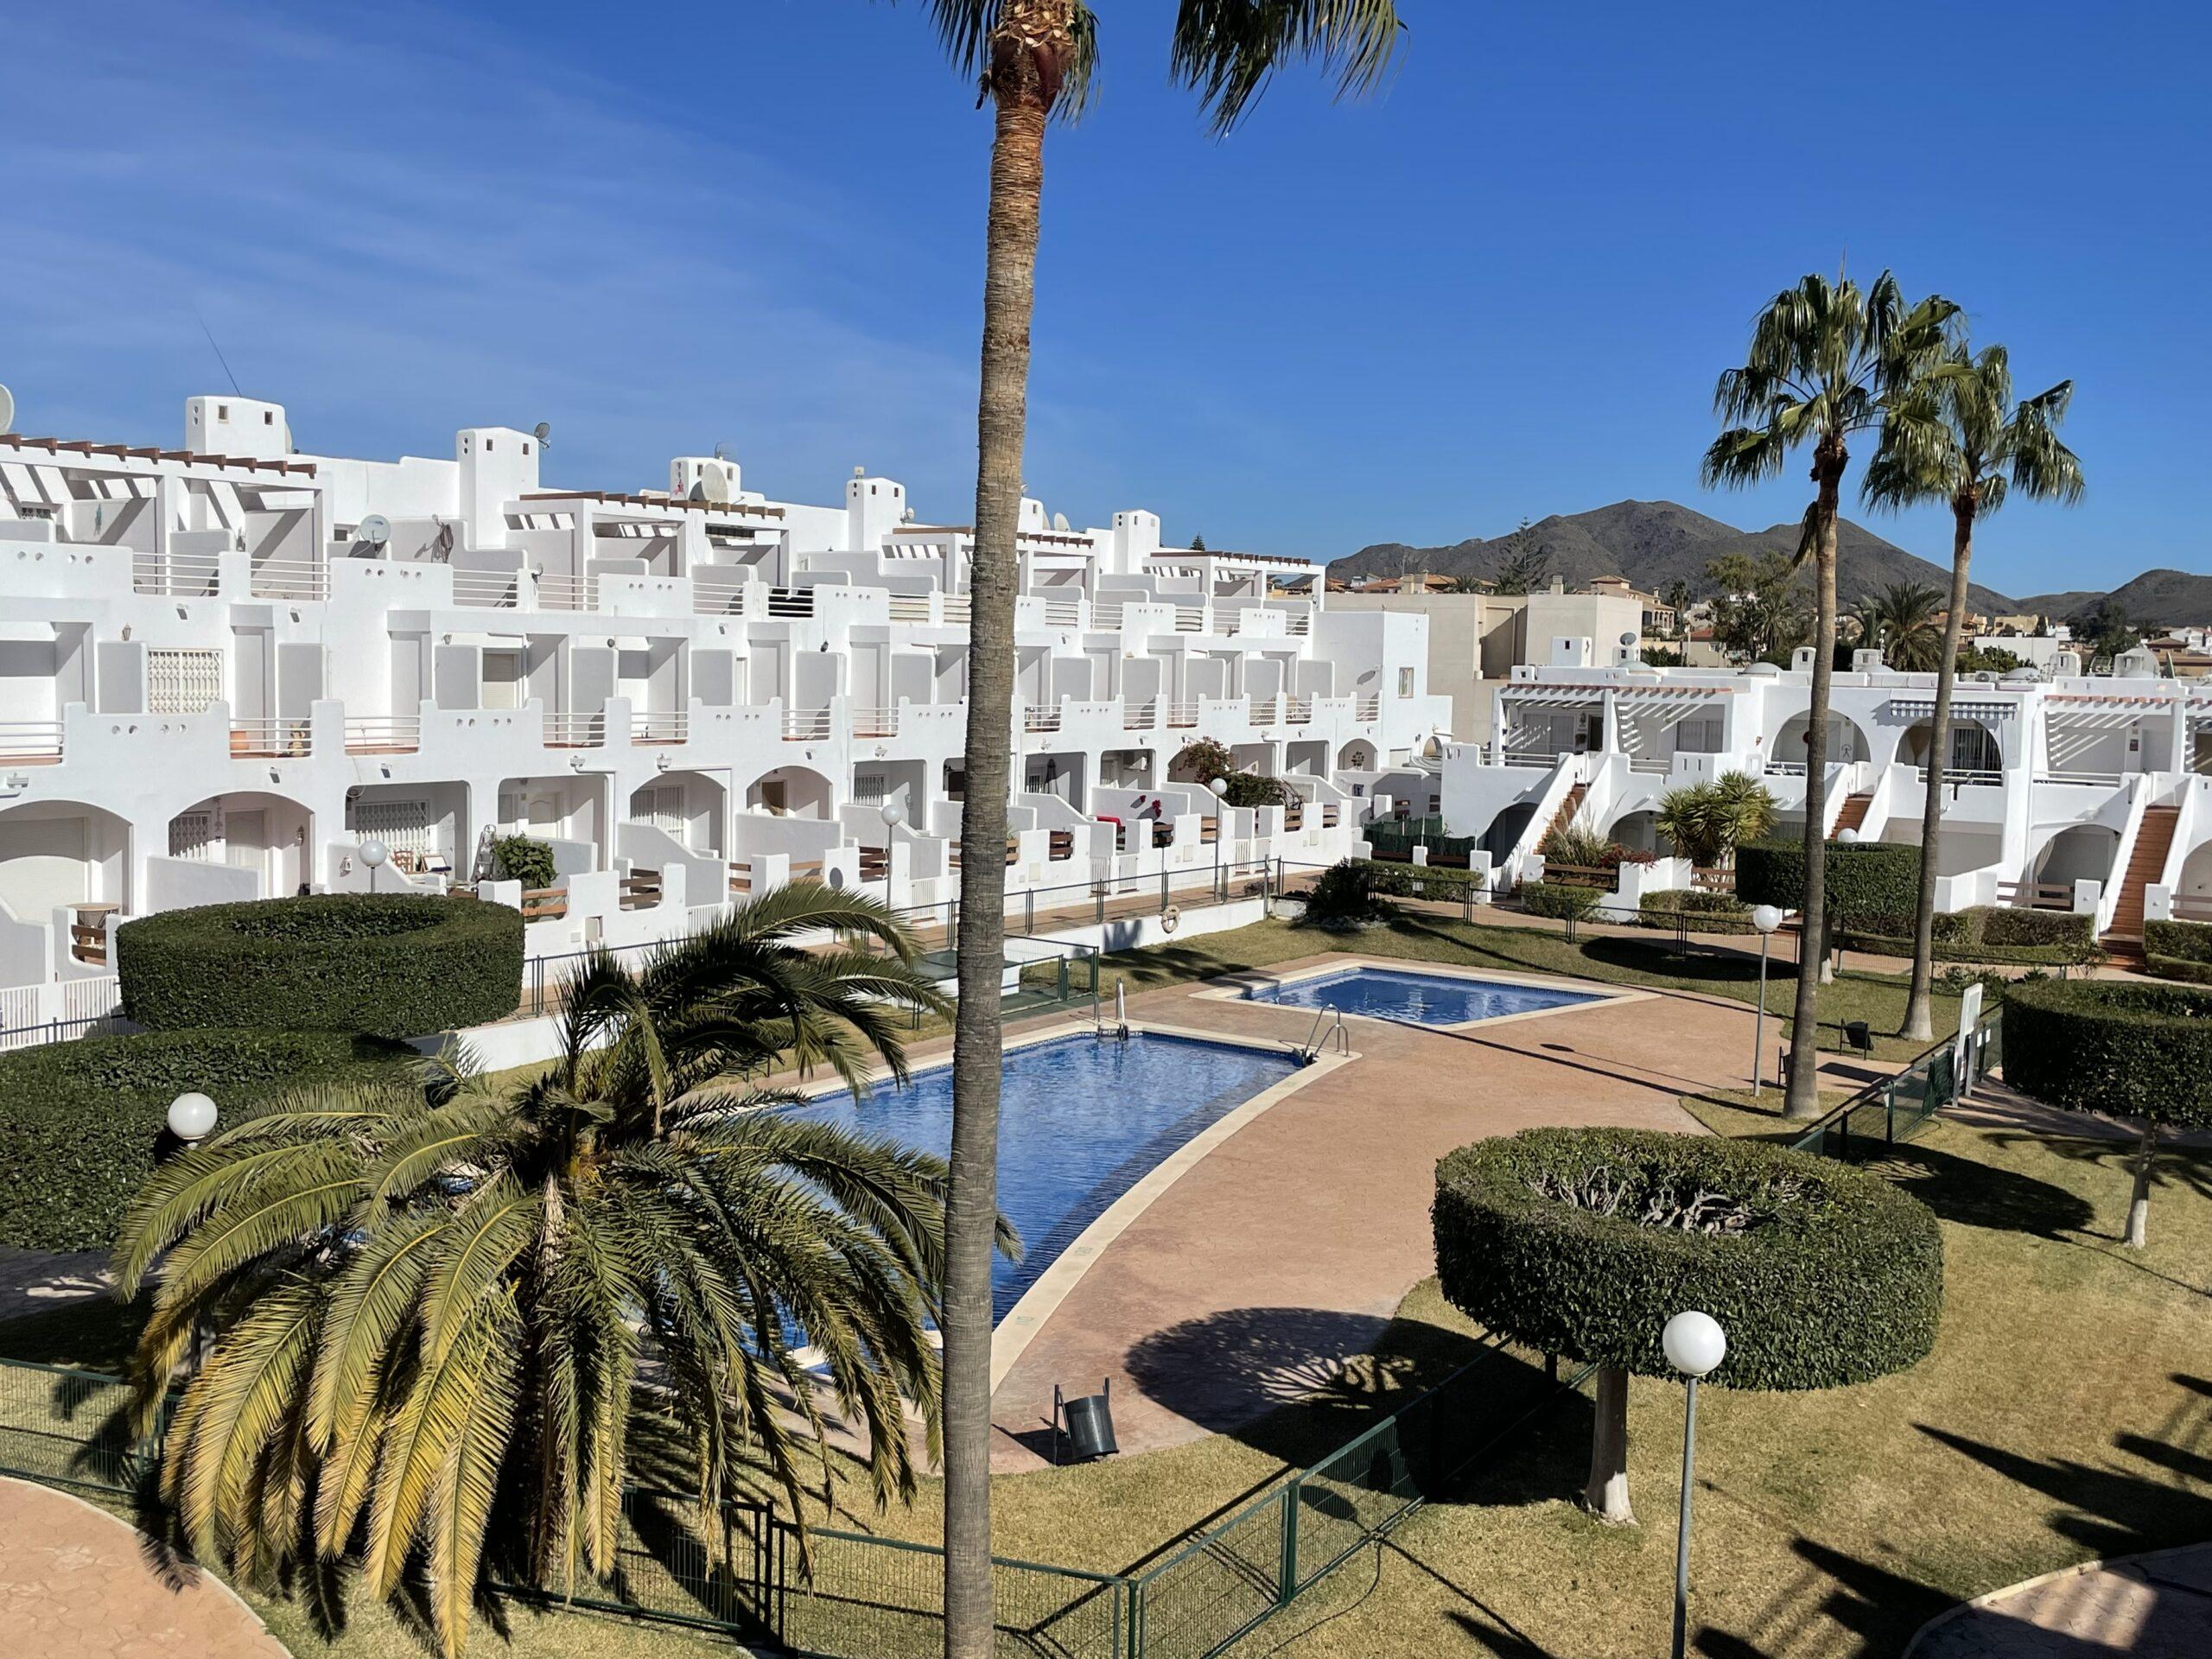 2 bedroom duplex with roof terrace for sale in Palomares